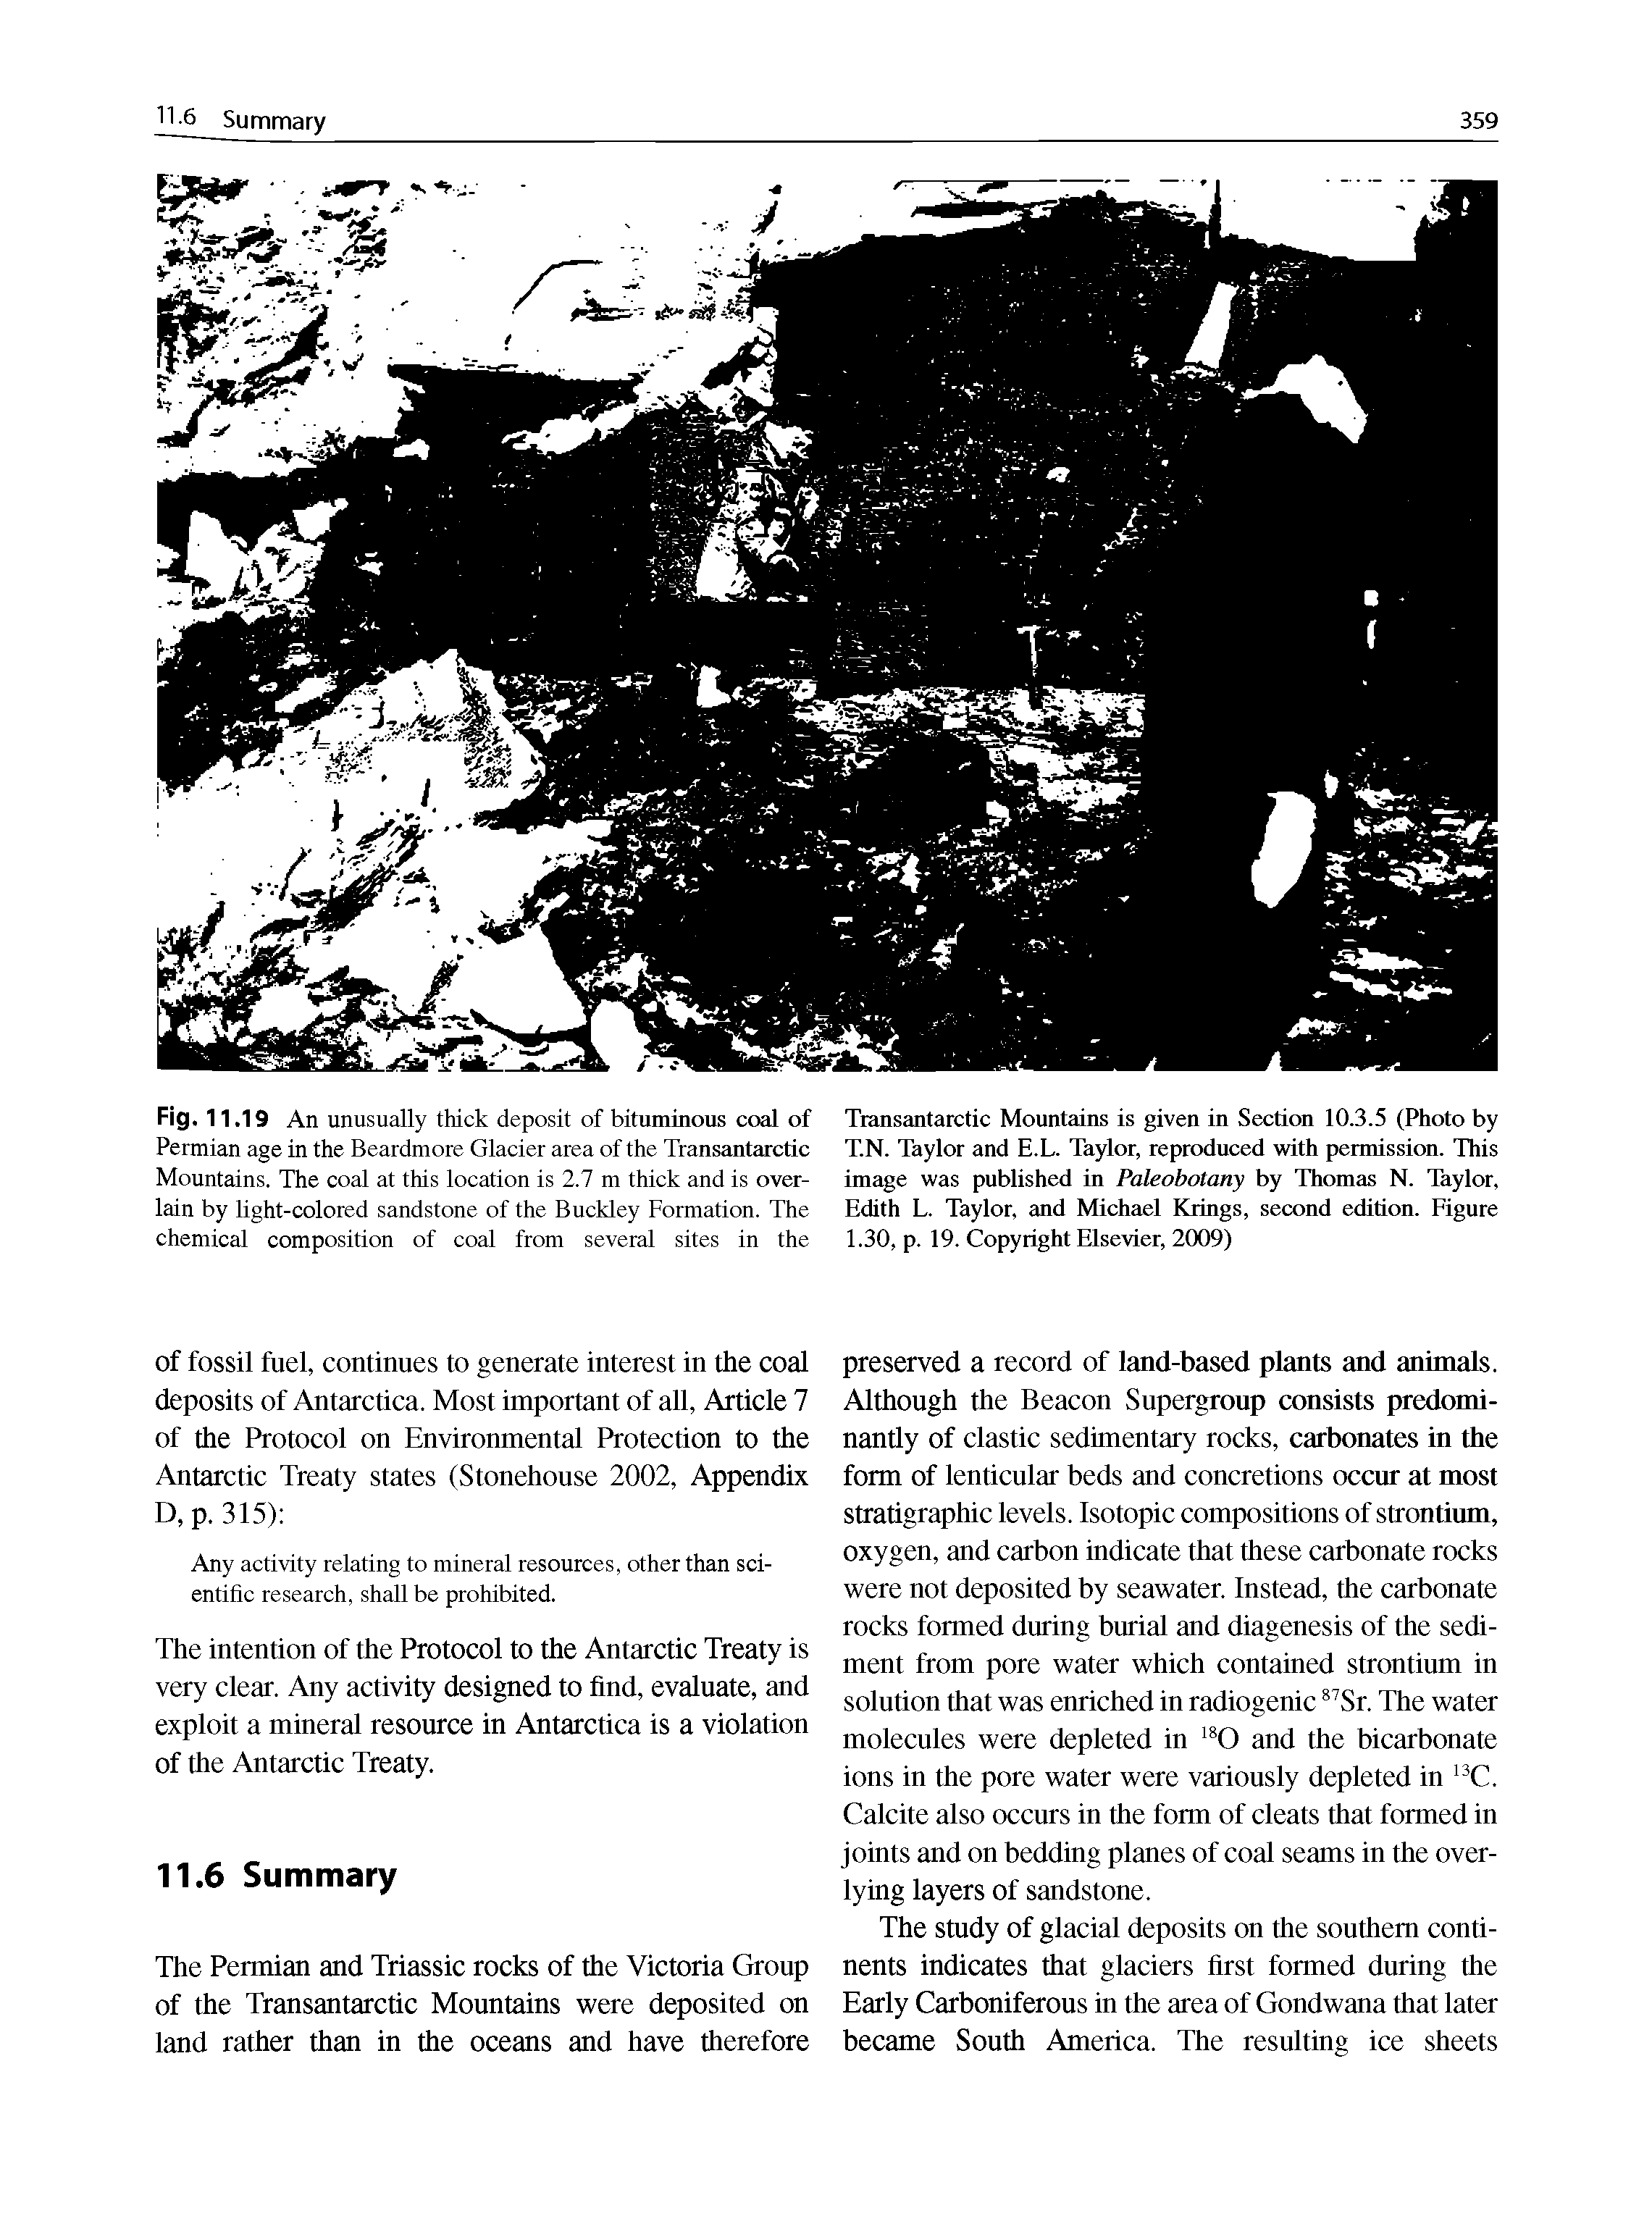 Fig. 11.19 An unusually thick deposit of bituminous coal of Permian age in the Beardmore Glacier area of the Transantarctic Mountains. The coal at this location is 2.7 m thick and is over-lain by light-colored sandstone of the Buckley Formation. The chemical composition of coal from several sites in the...